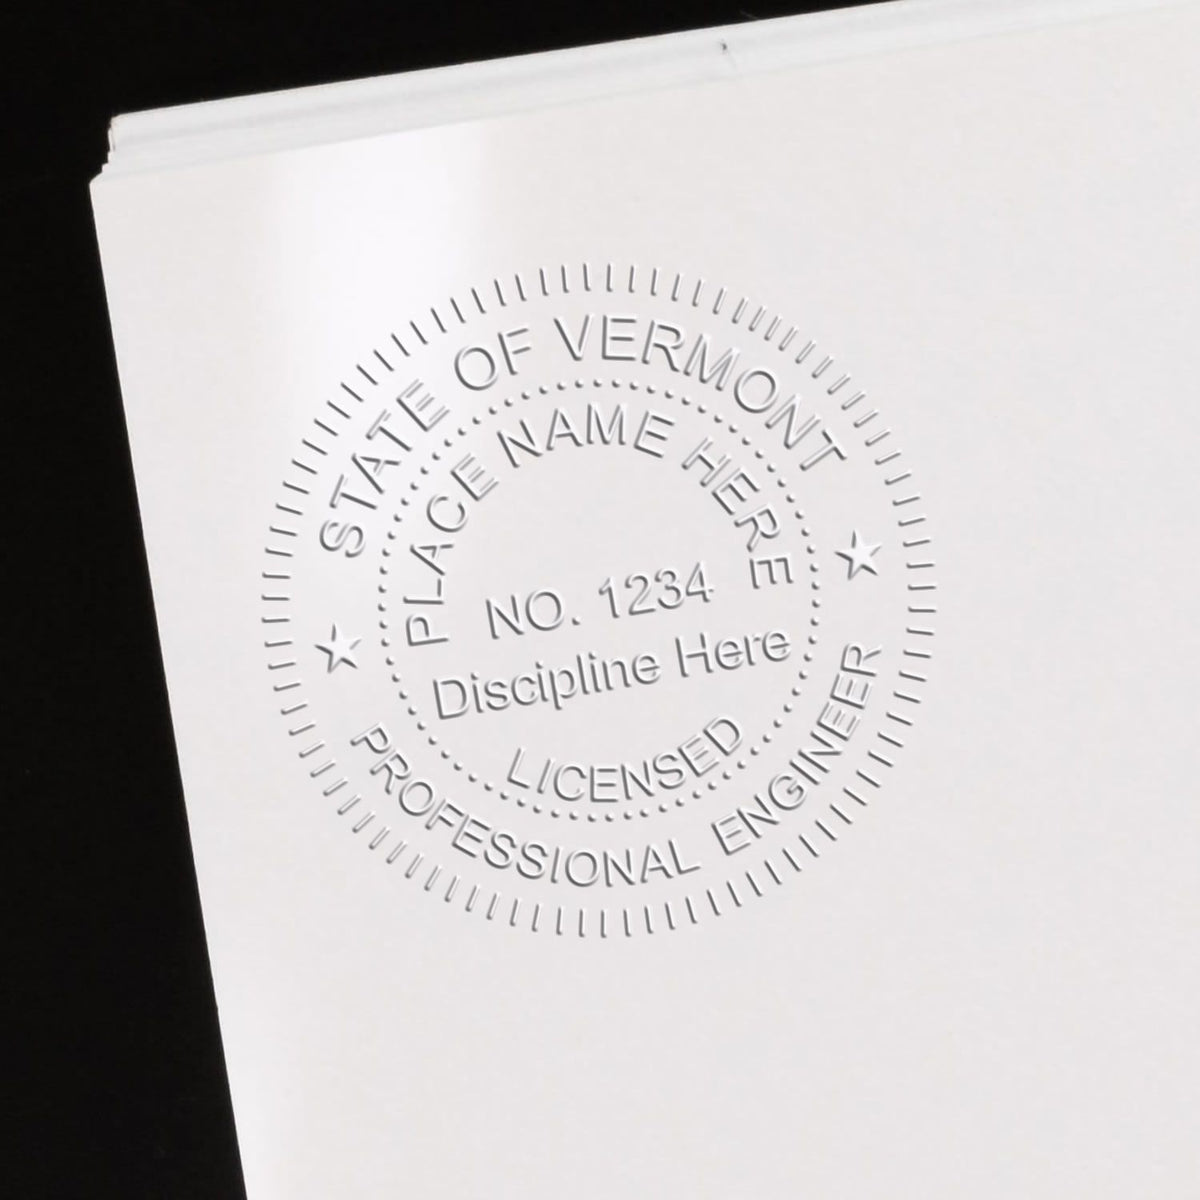 The State of Vermont Extended Long Reach Engineer Seal stamp impression comes to life with a crisp, detailed photo on paper - showcasing true professional quality.